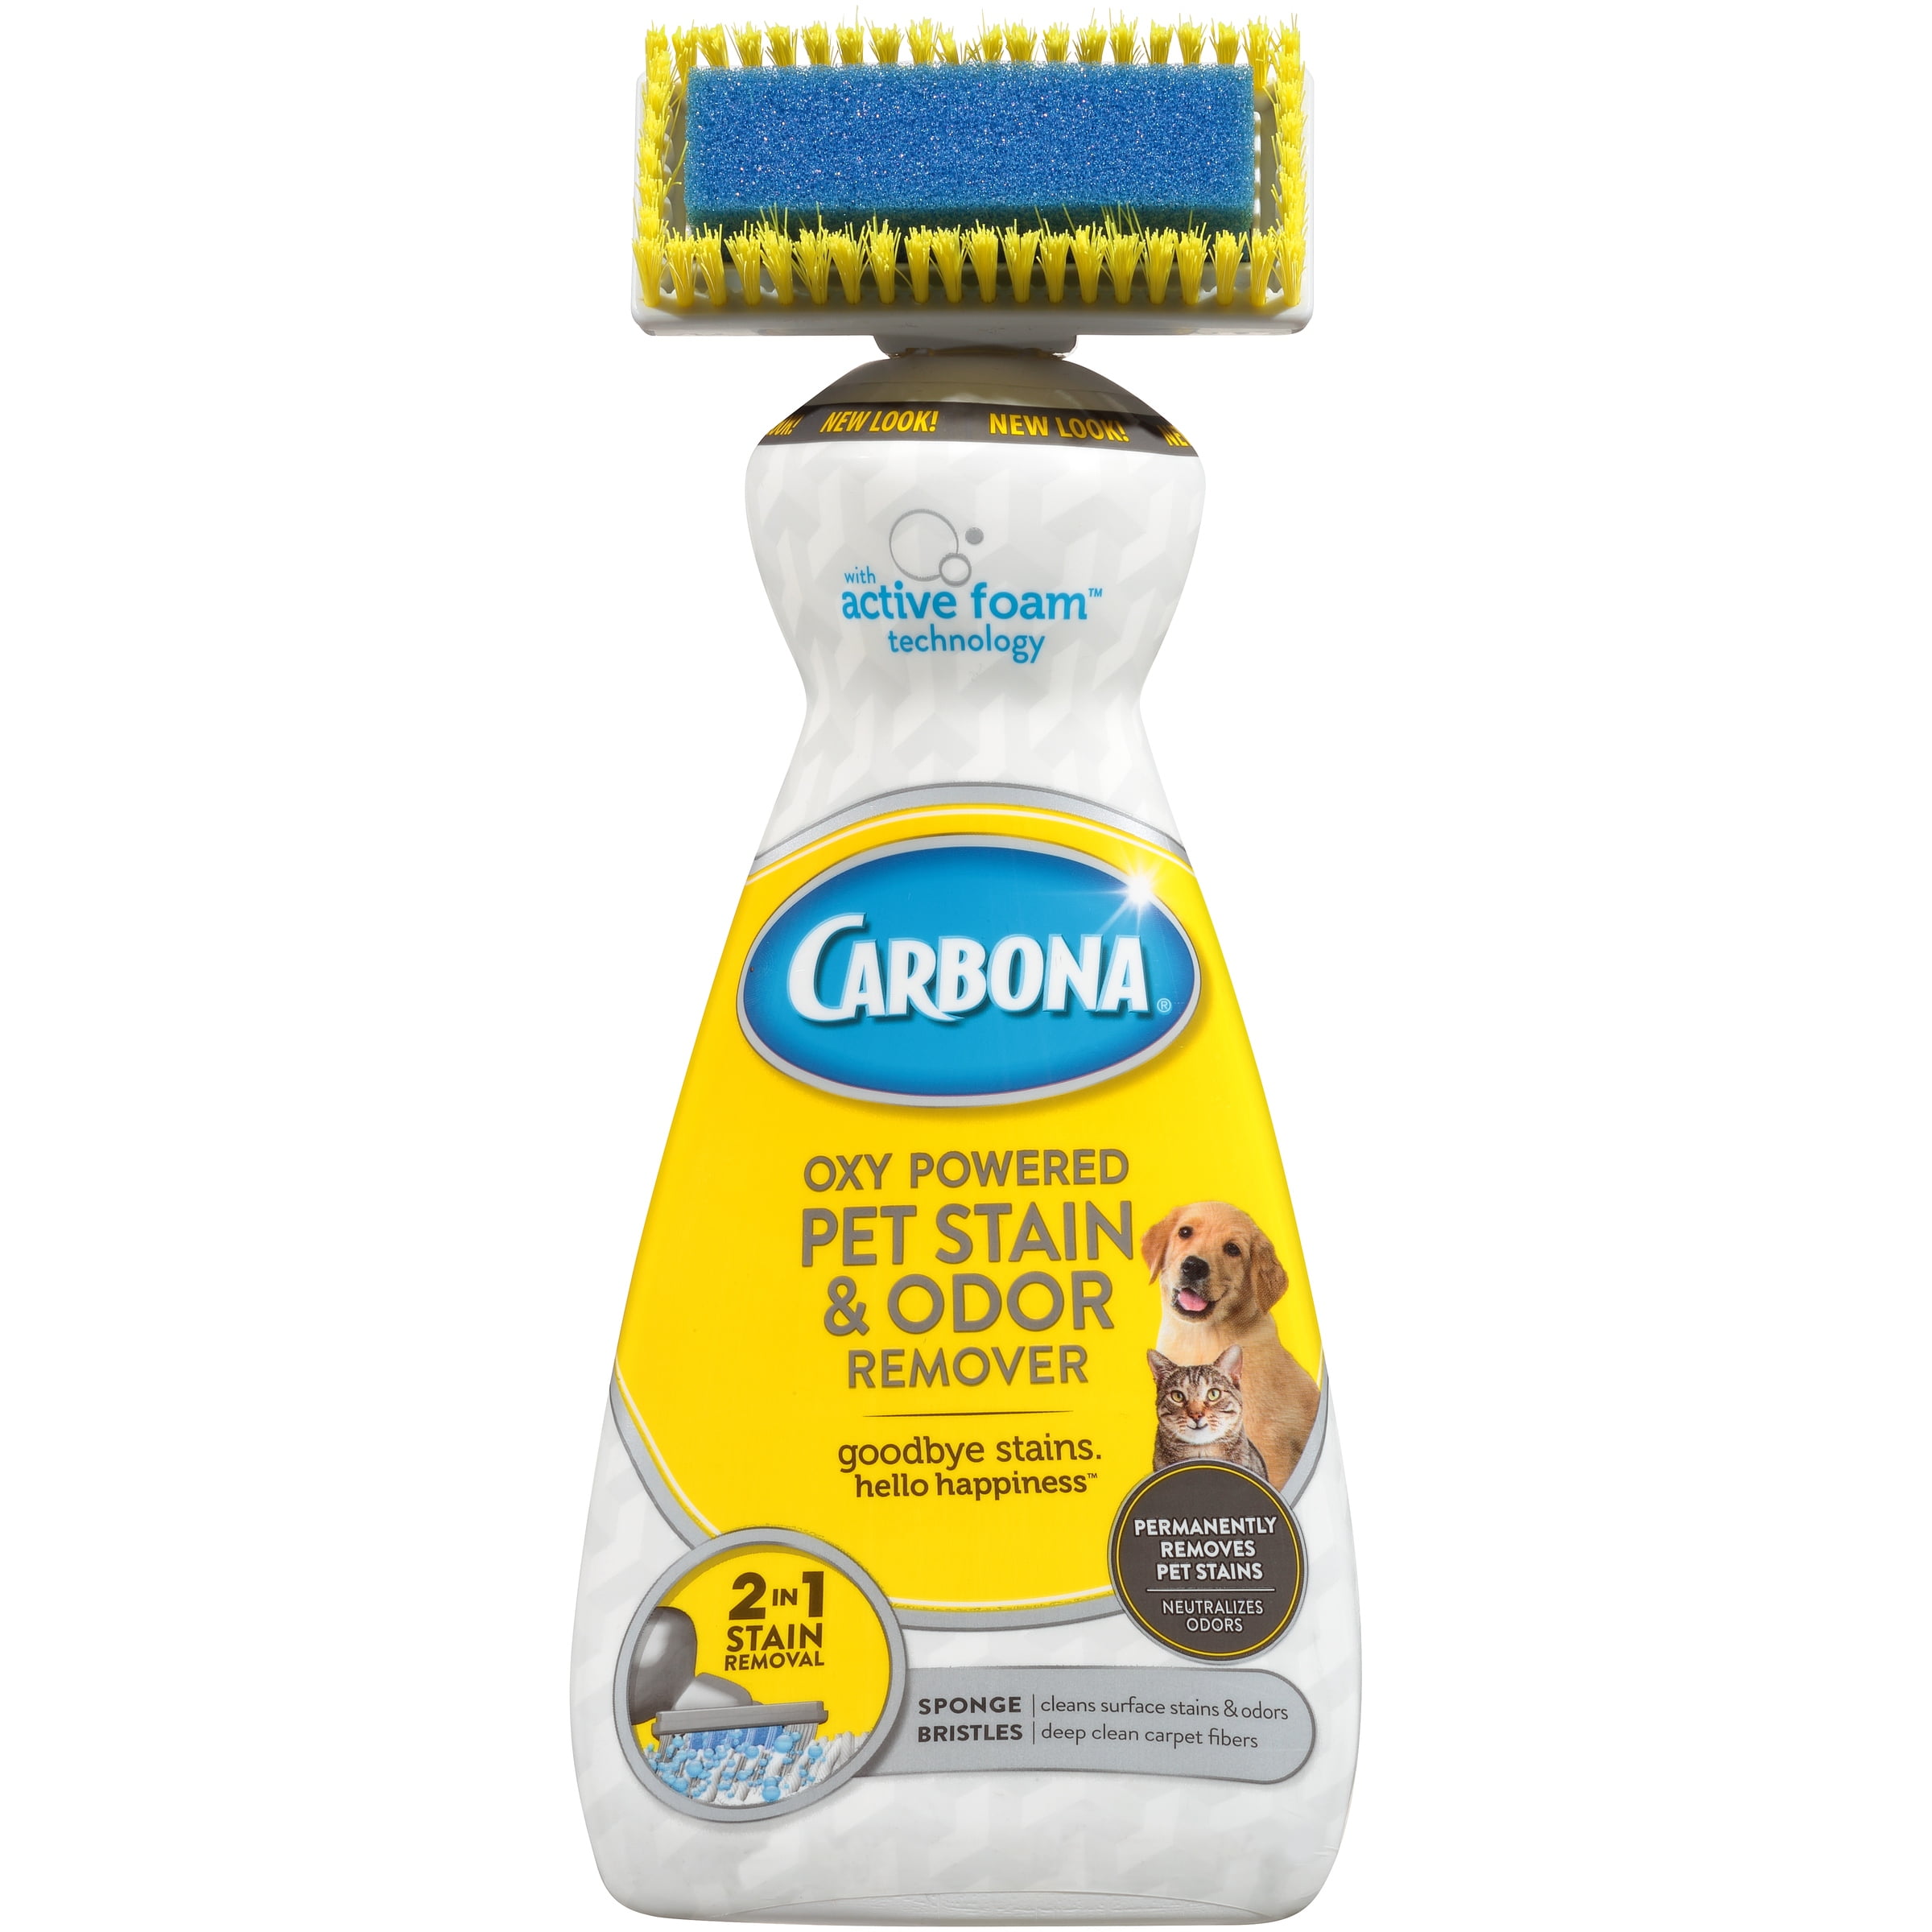 Carbona Pro Care Outdoor Cleaner, Oxy Powered - 22 fl oz